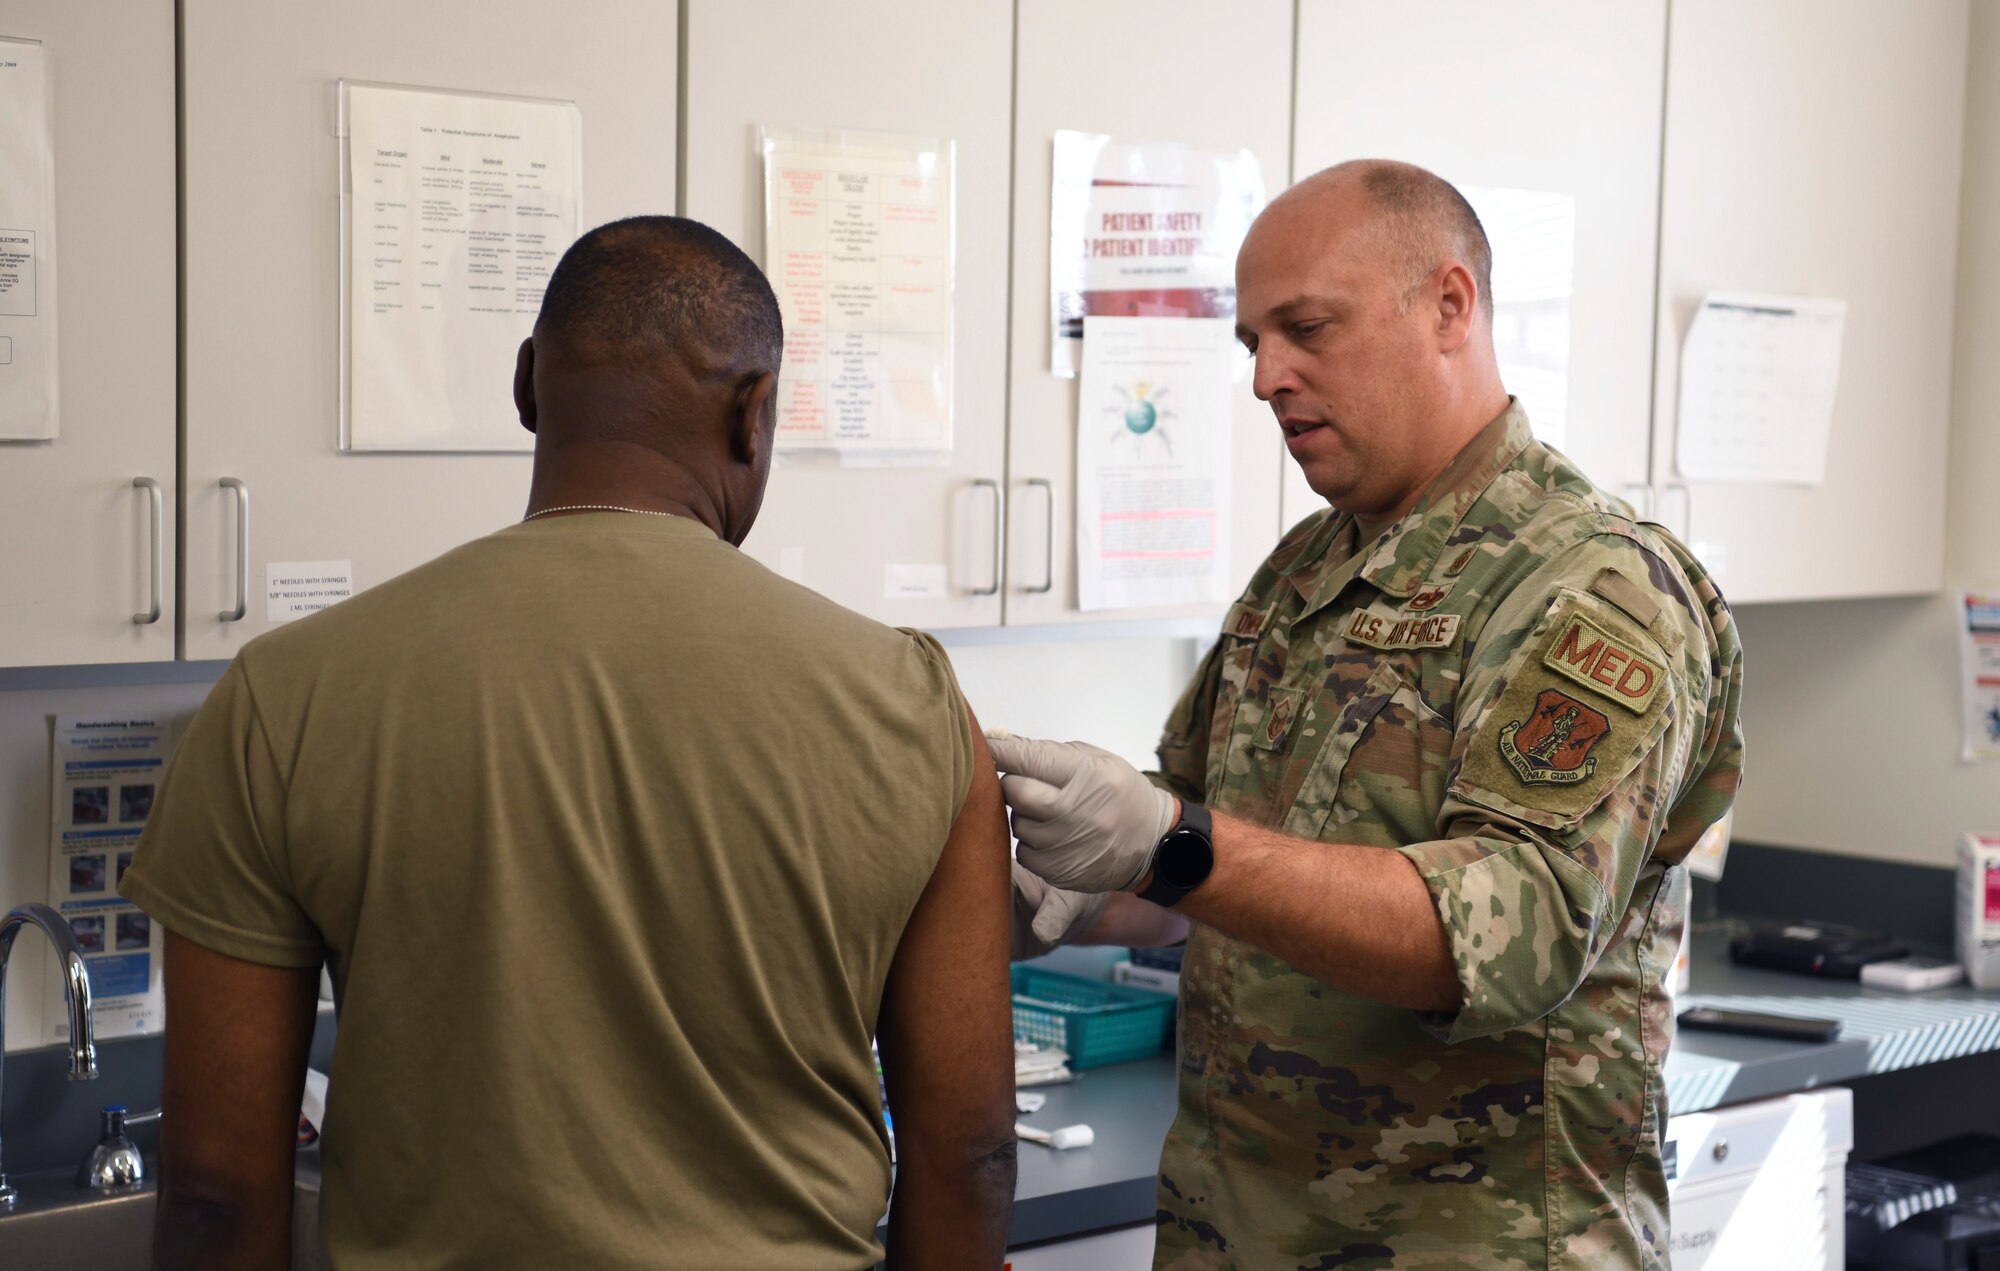 U.S. Air Force Chief Master Sgt. Maurice Williams, left, command chief, Air National Guard, receives his annual influenza vaccination while on a tour of the 178th Wings medical group, Oct. 15, 2022, in Springfield, Ohio. All U.S. military members are required to be vaccinated against influenza to remain mission ready. (U.S. Air National Guard photo by Senior Airman Jillian Maynus).